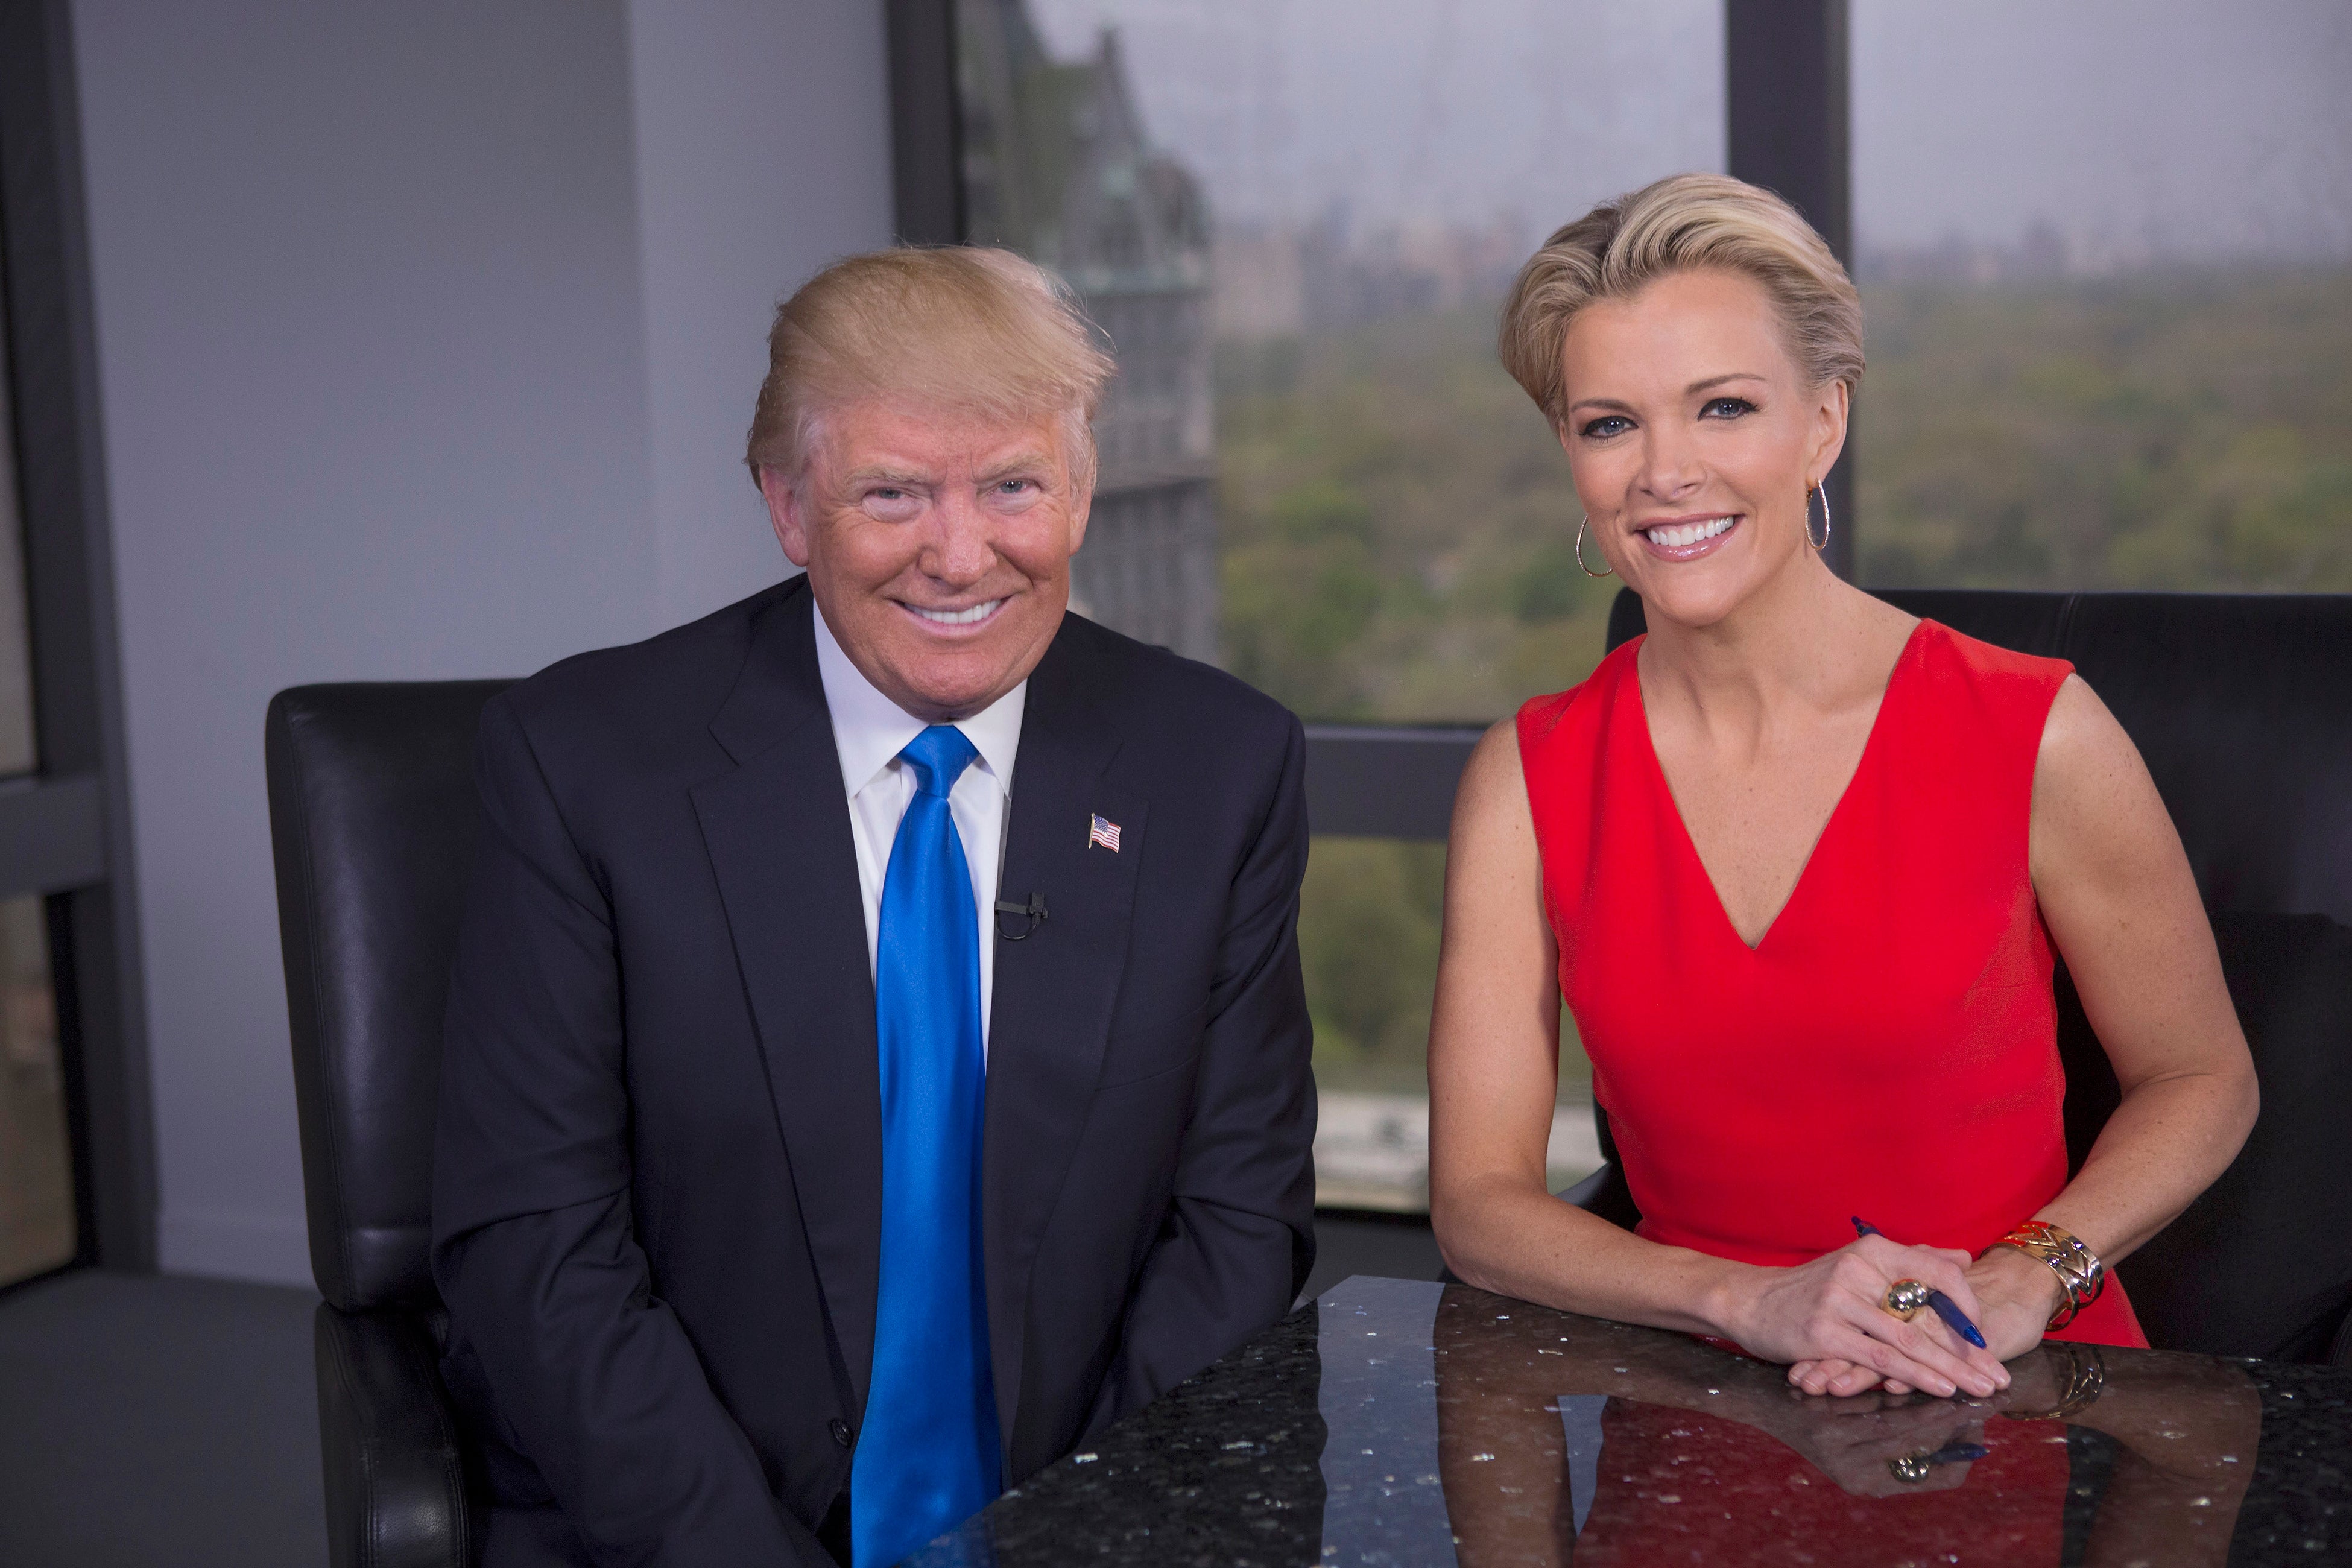 Accommodating Megyn Kelly At The Expense Of Two Prominent Black Anchors Sure Seems Like A Nod To Trump's America
